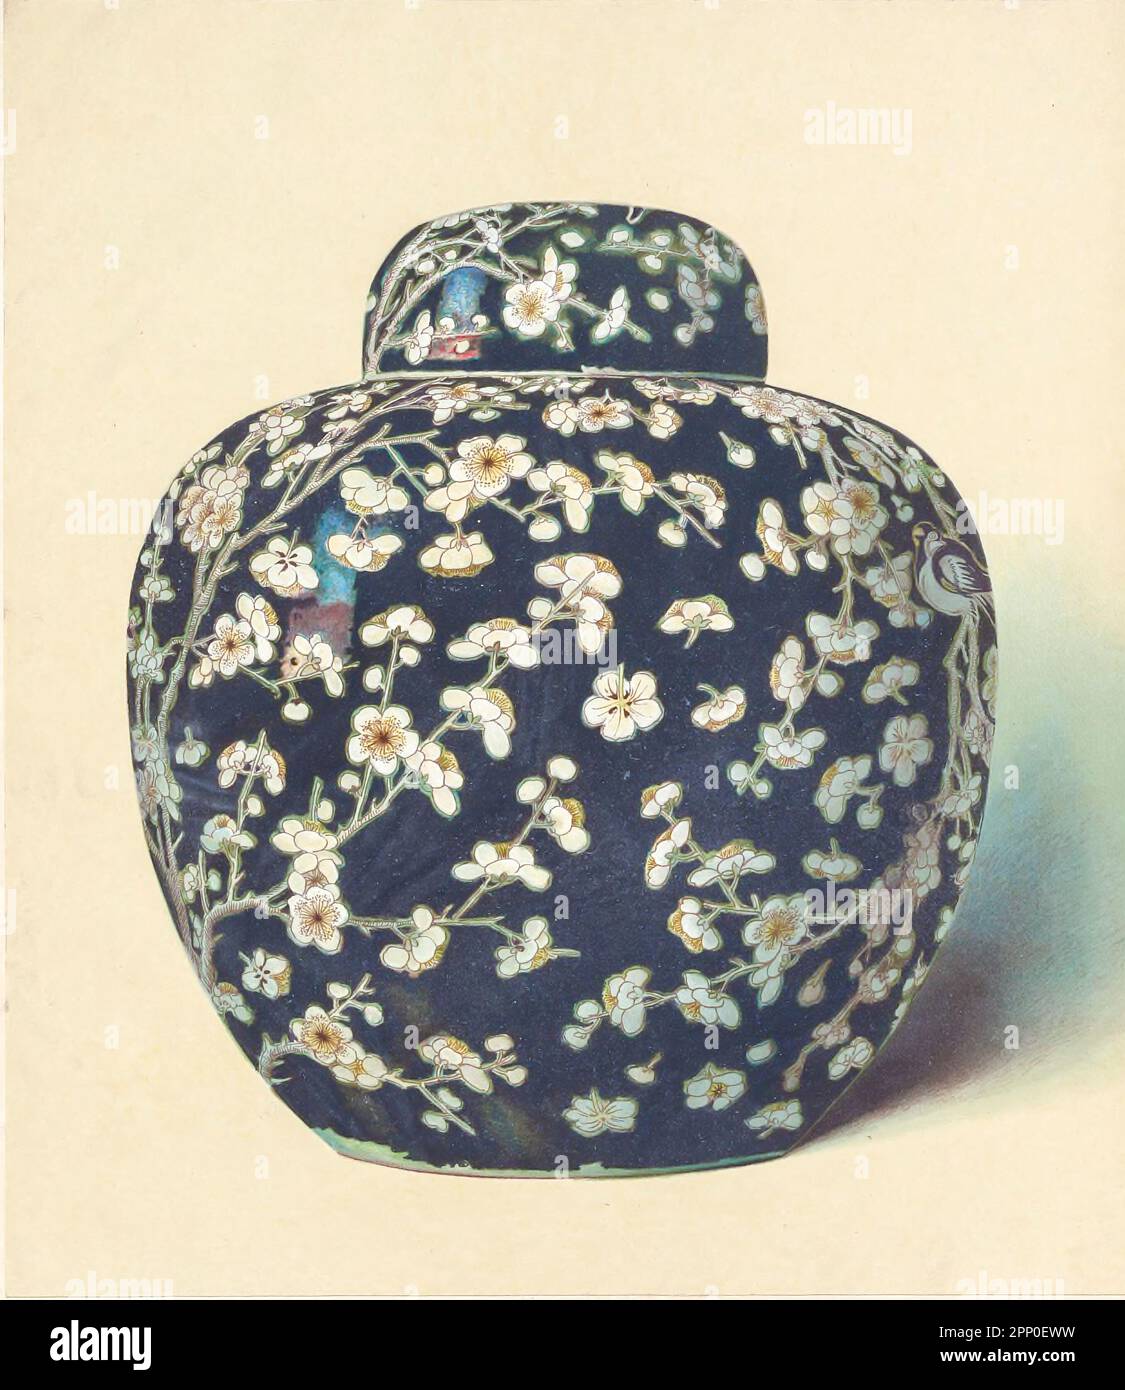 BLACK ' HAWTHORN ' JAR. PLUM-BLOSSOM JAR (Mei Hua Kuan) 10.5 inches high, of globular outline, with rounded cover, decorated with an interlacement of floral sprays, springing upward from a rockery on one side, and downward from the rim From the book ' ORIENTAL CERAMIC ART COLLECTION OF William Thompson Walters ' Published in 1897 Stock Photo